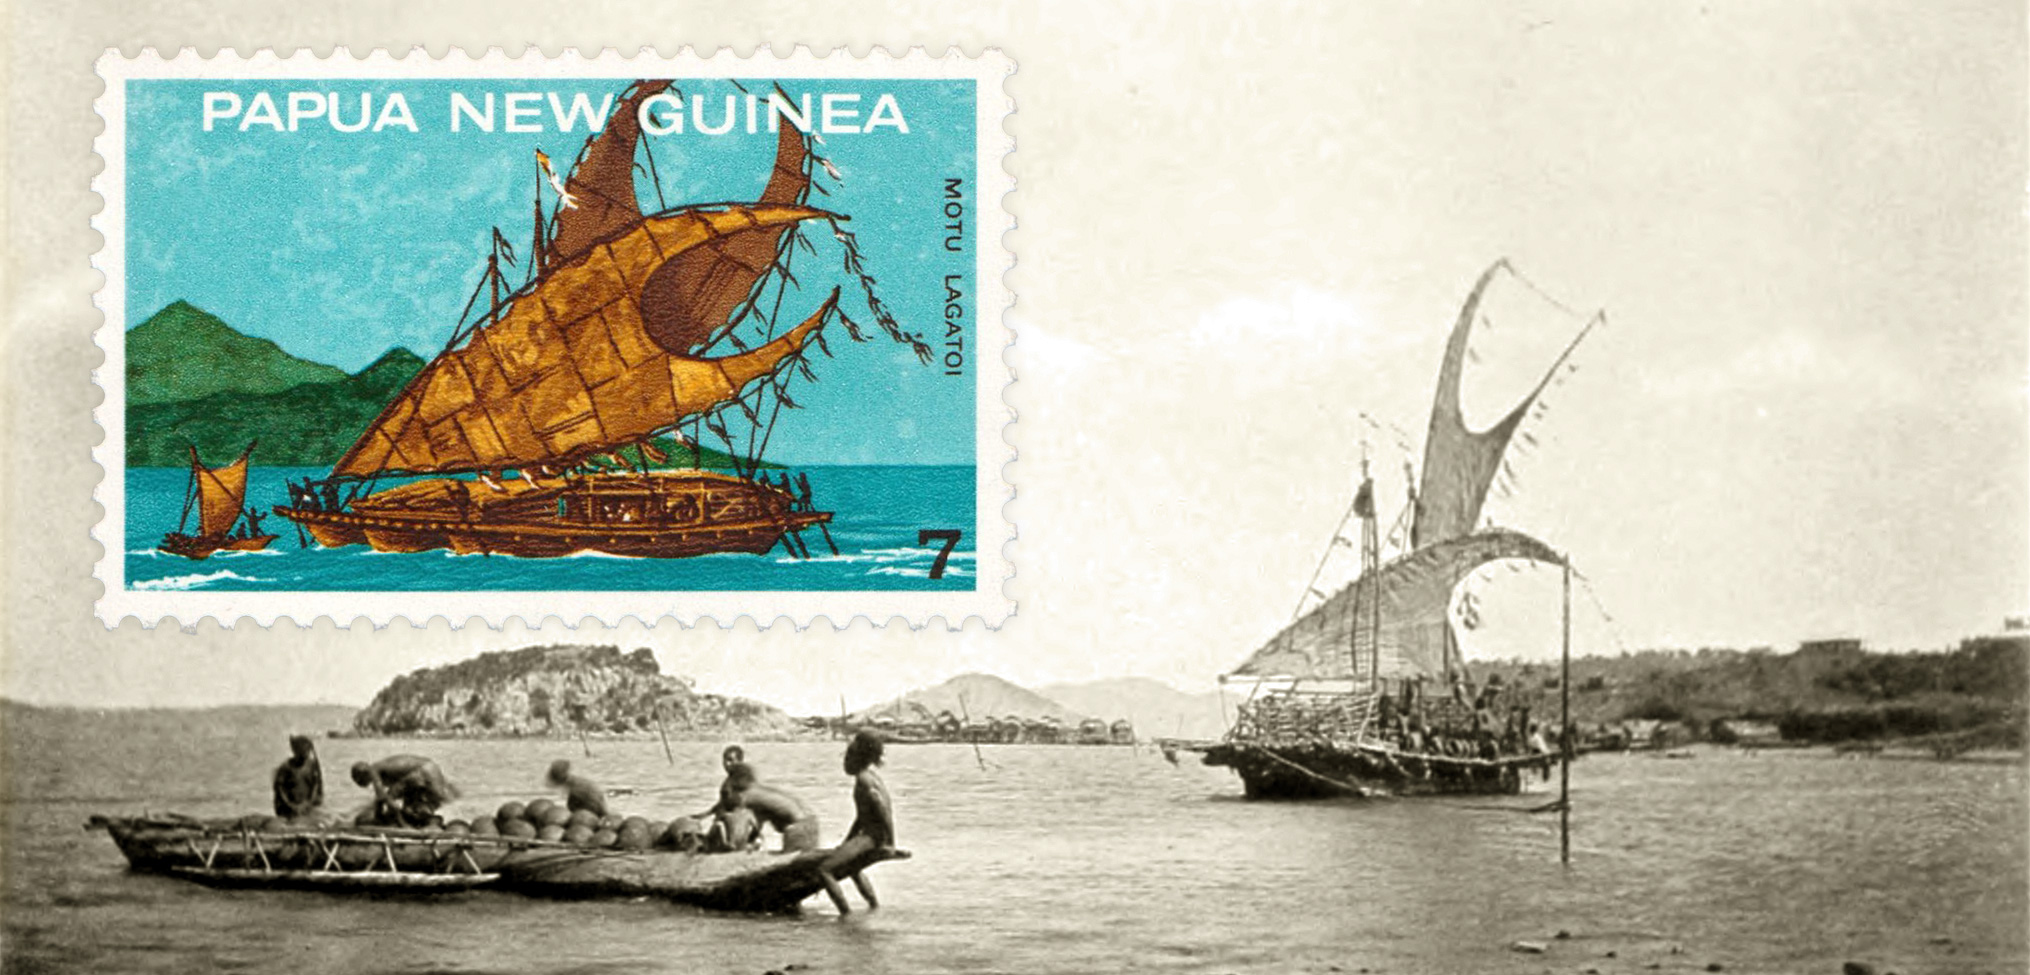 The lagatoi traditional canoe, featured on this seven-cent stamp from 1975, has been a predominant theme in Papuan philately. Stamp image used with permission from Post PNG Ltd, background photo courtesy of Wikimedia